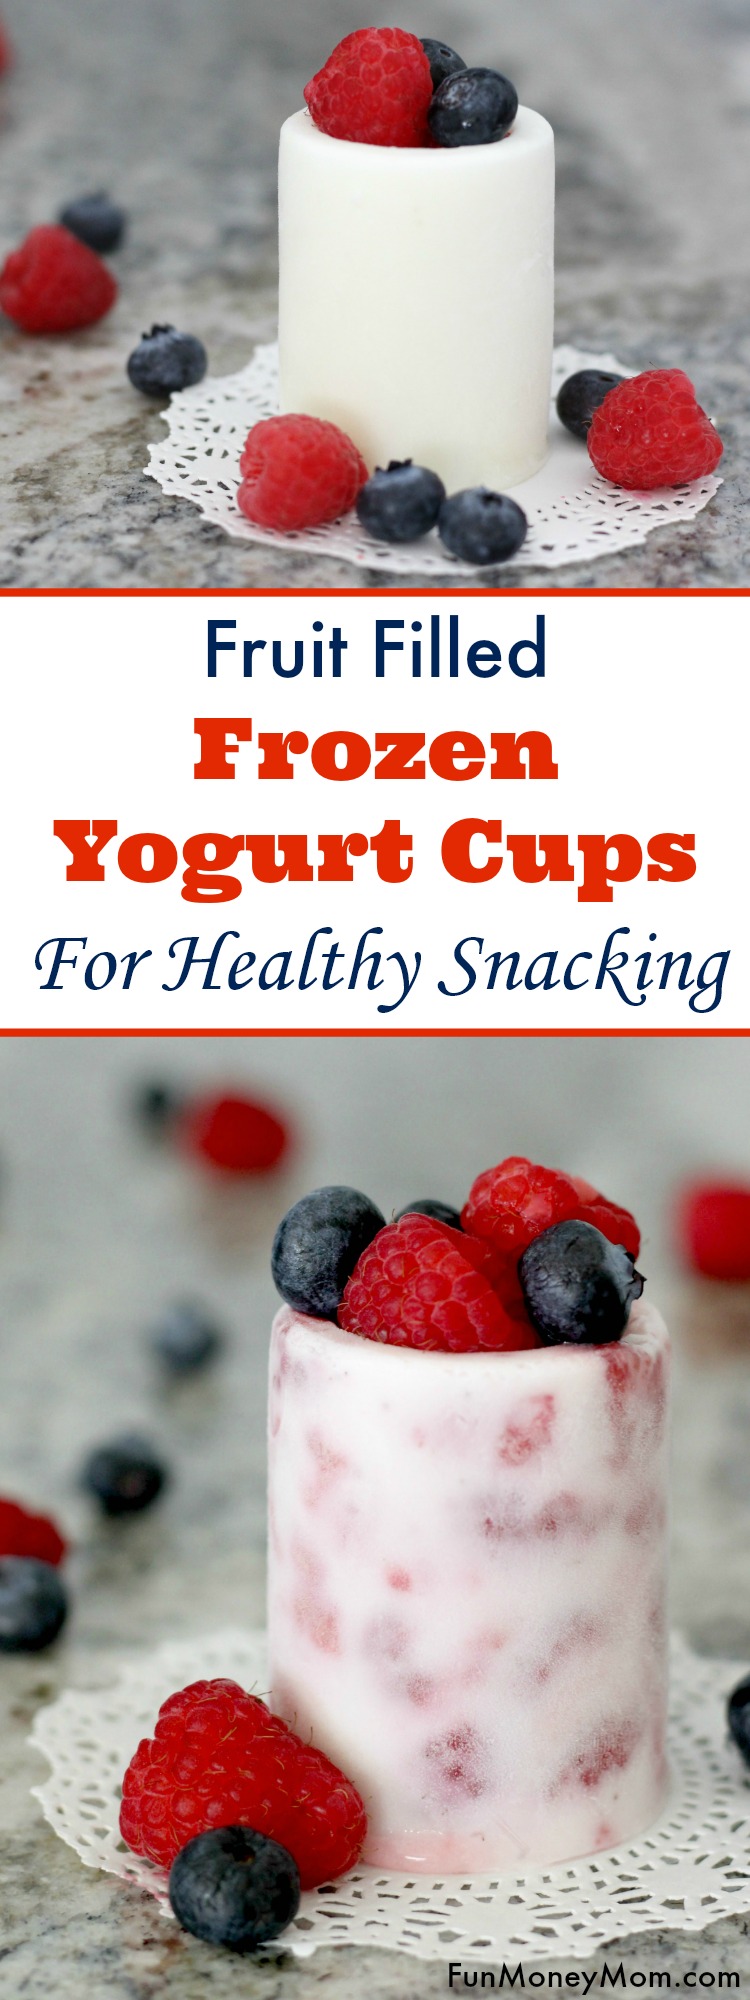 Trying to find healthy snacks that the kids can get excited about? They'll love making these frozen yogurt cups. Let them fill their cups with their favorite fruit and they'll see that eating healthy can be fun too!